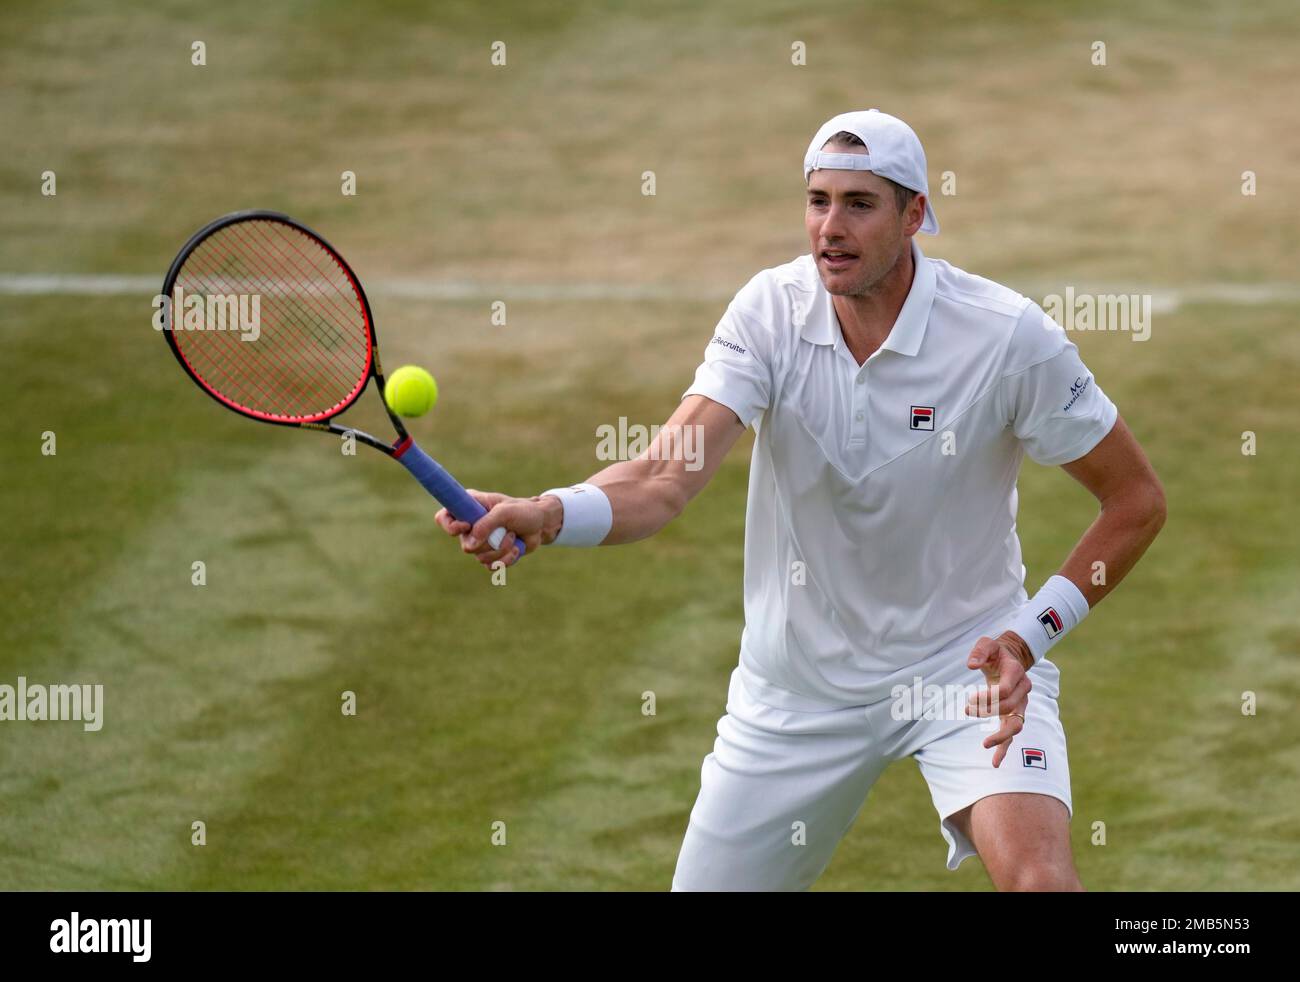 John Isner of the US returns to Italys Jannik Sinner during their mens singles third round match on day five of the Wimbledon tennis championships in London, Friday, July 1, 2022